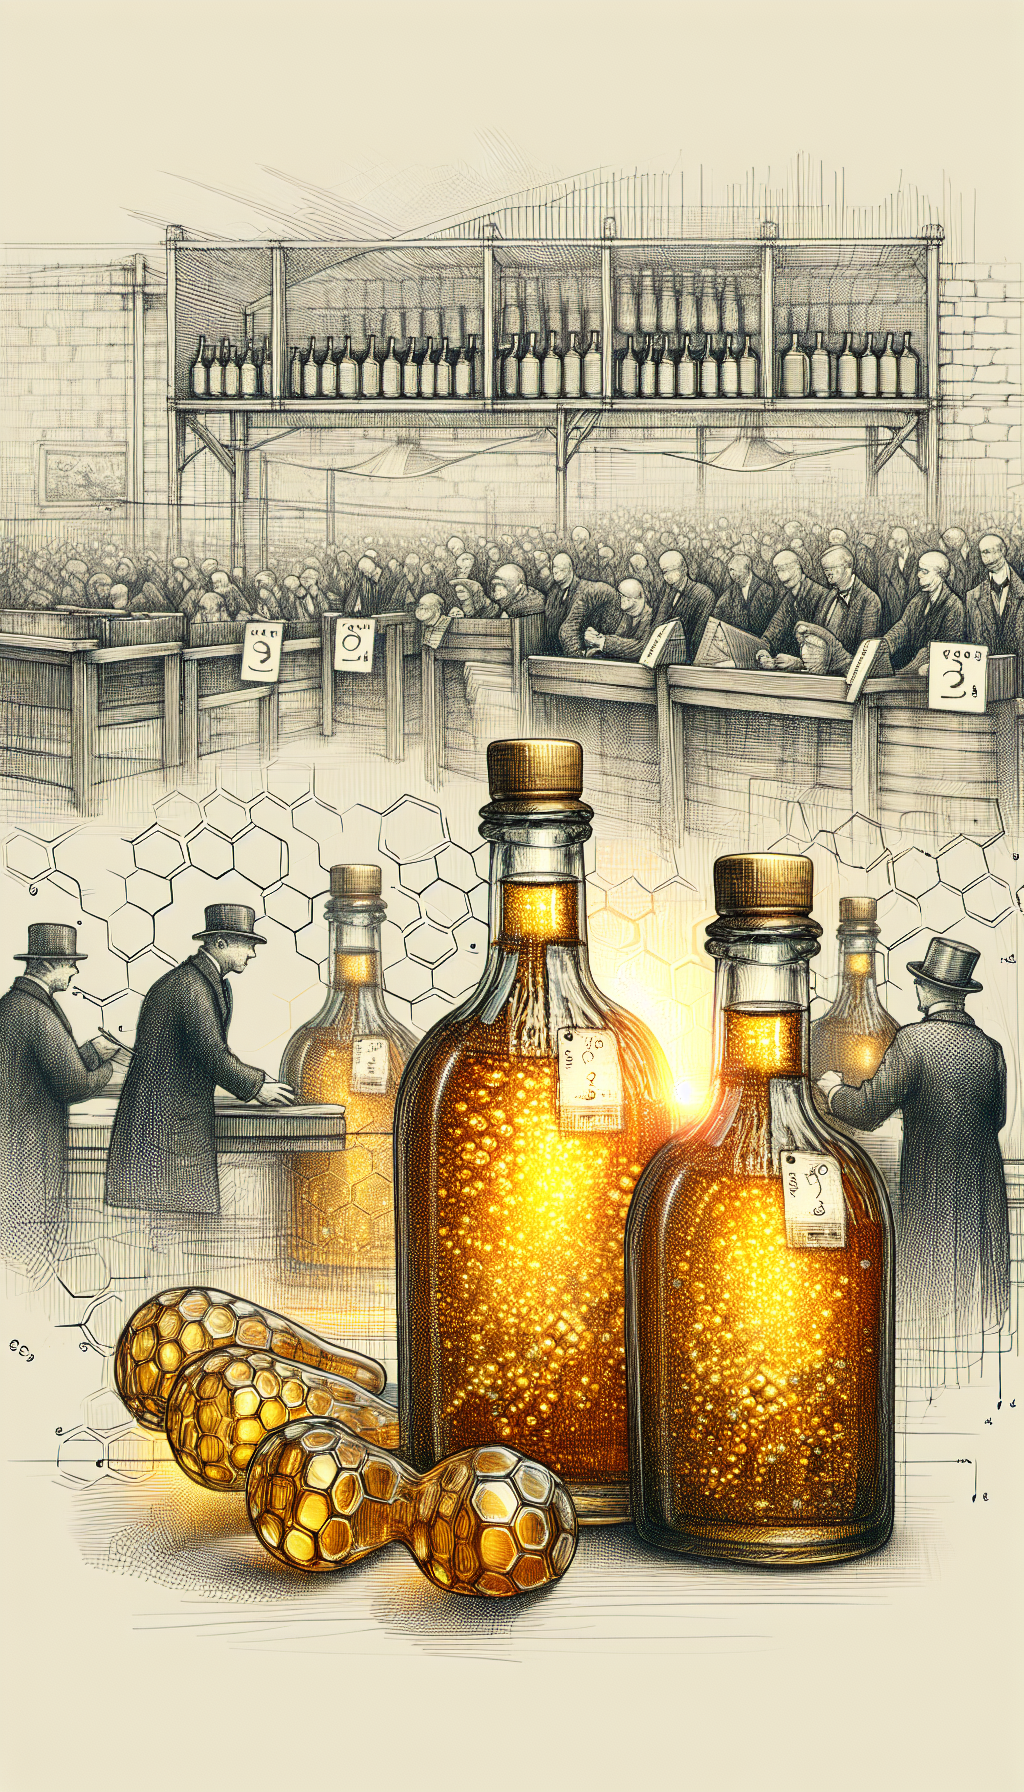 A richly textured illustration portraying a cluster of antique syrup bottles in golden hues as if filled with shimmering liquid gold. One bottle is magnified, showing a price tag with an exorbitant sum, underscored by a bustling auction scene in the background—highlighting their rarity and value. Amidst the bottles, a transparent honeycomb pattern subtly symbolizes the sweet treasure they hold.